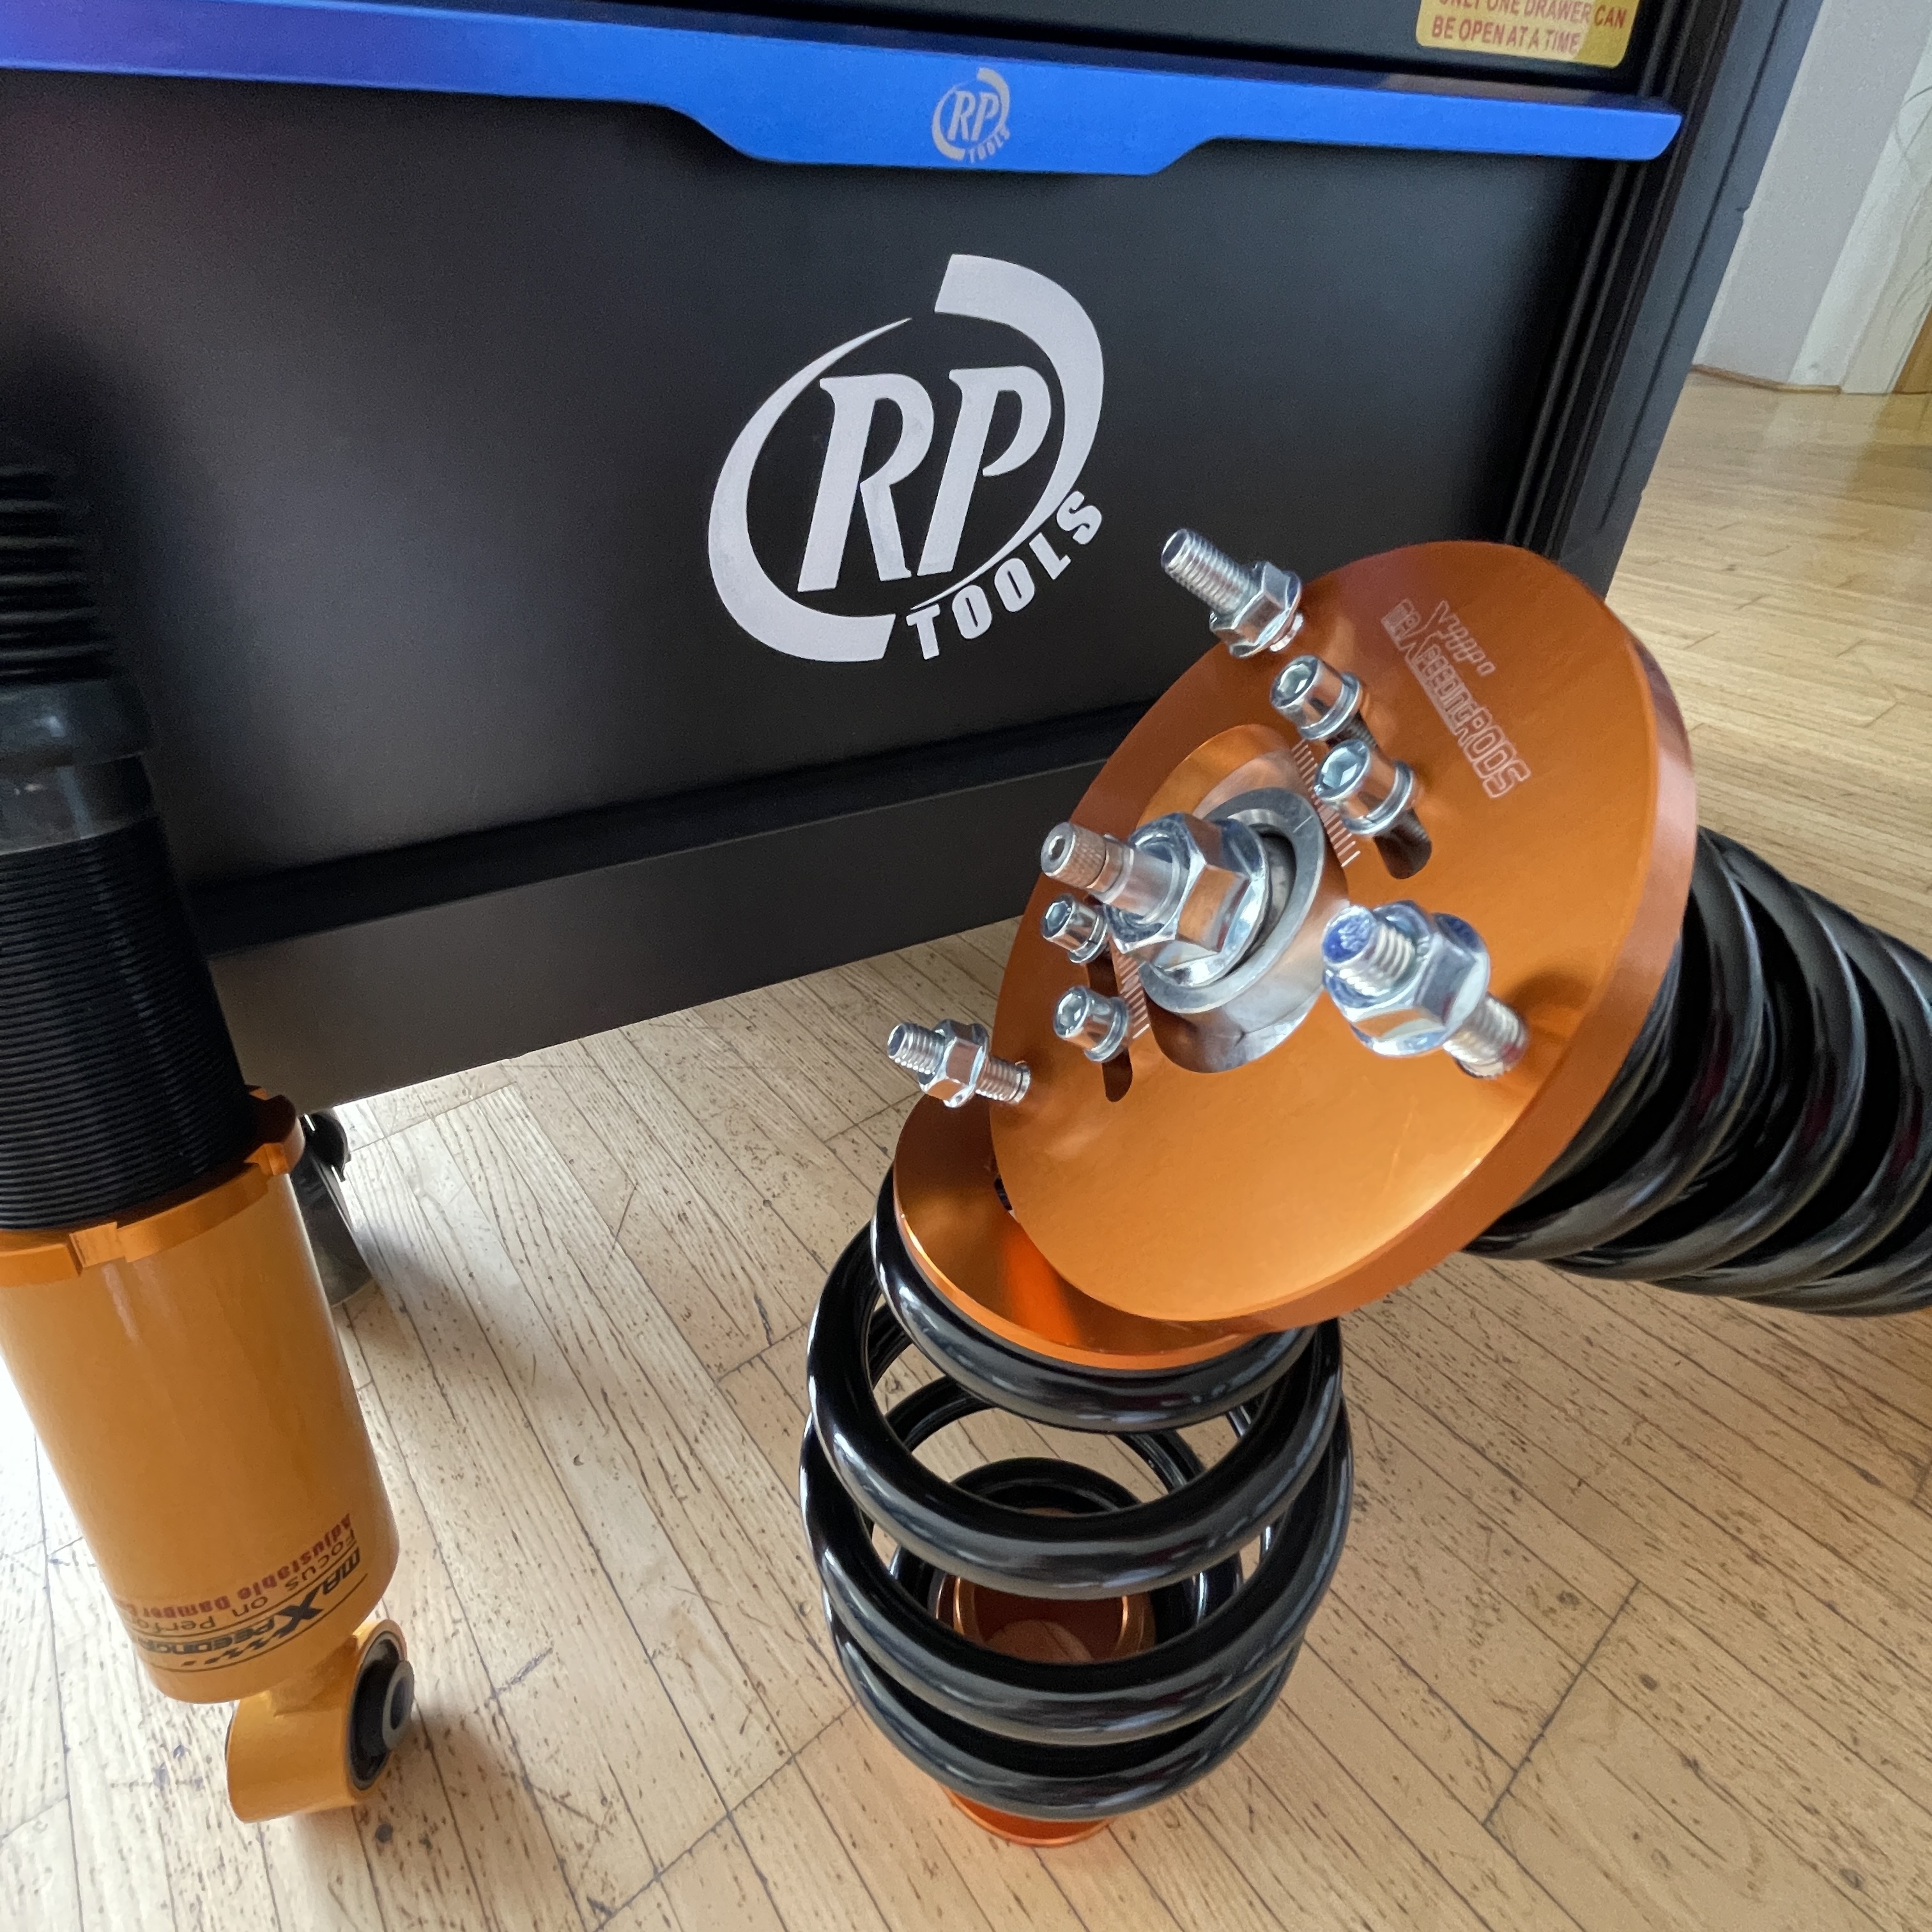 MaXpeedingRods Blog | An Automotive Blog from MaXpeedingRods - Something You Need to Know about adjustable damping coilovers.